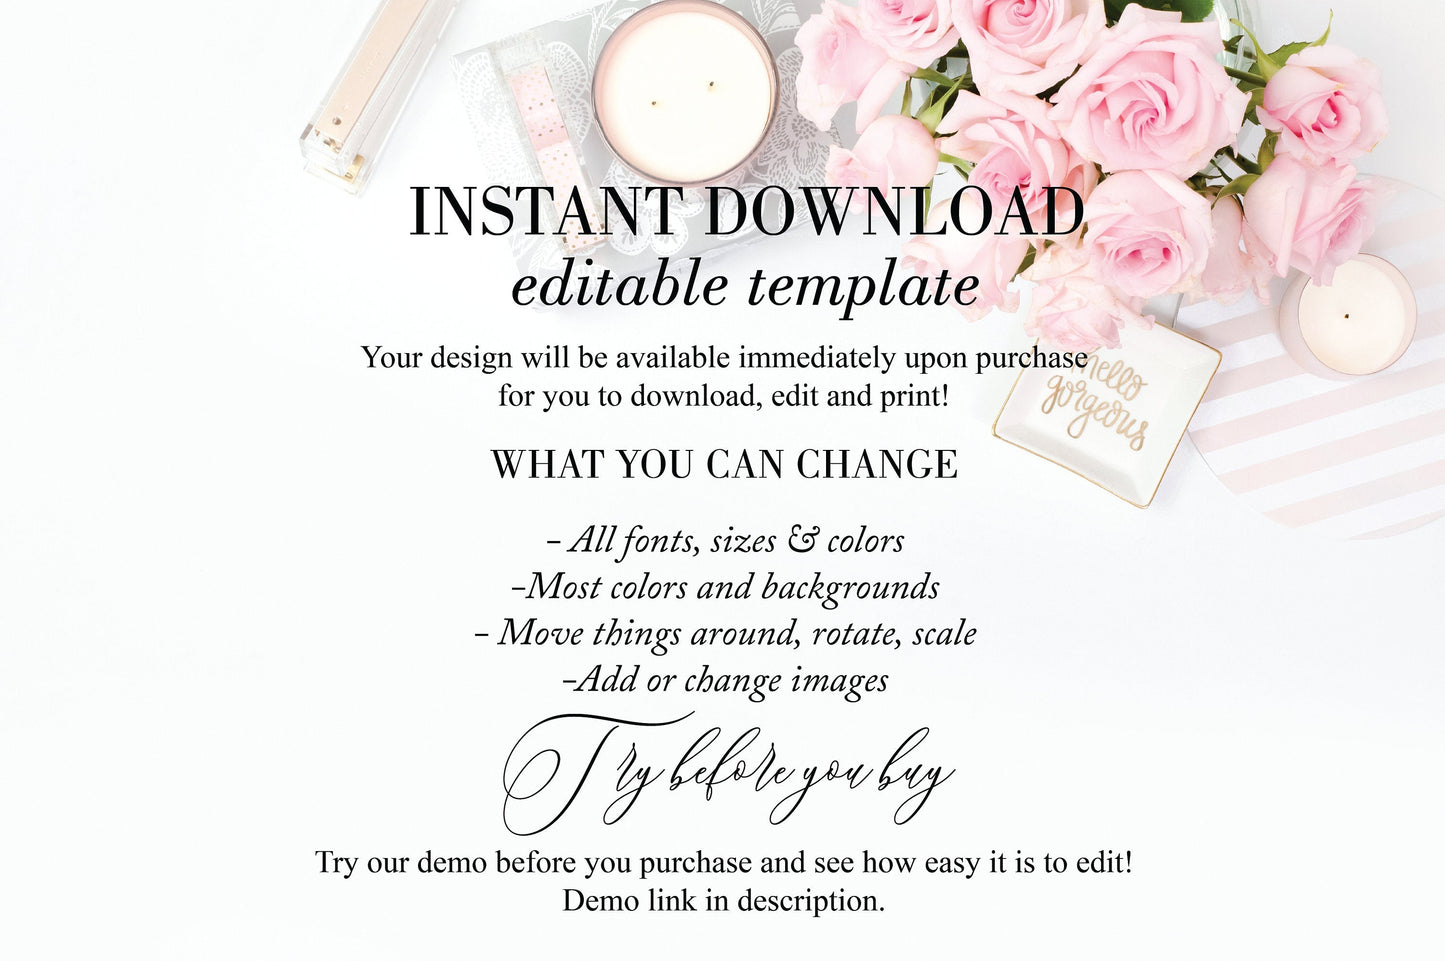 Printable Belly Band Template Simple Elegant Wedding Belly Bands Invitation Editable Belly Band Templett DIY Gold - HEATHER WEDDING INVITATIONS SAVVY PAPER CO